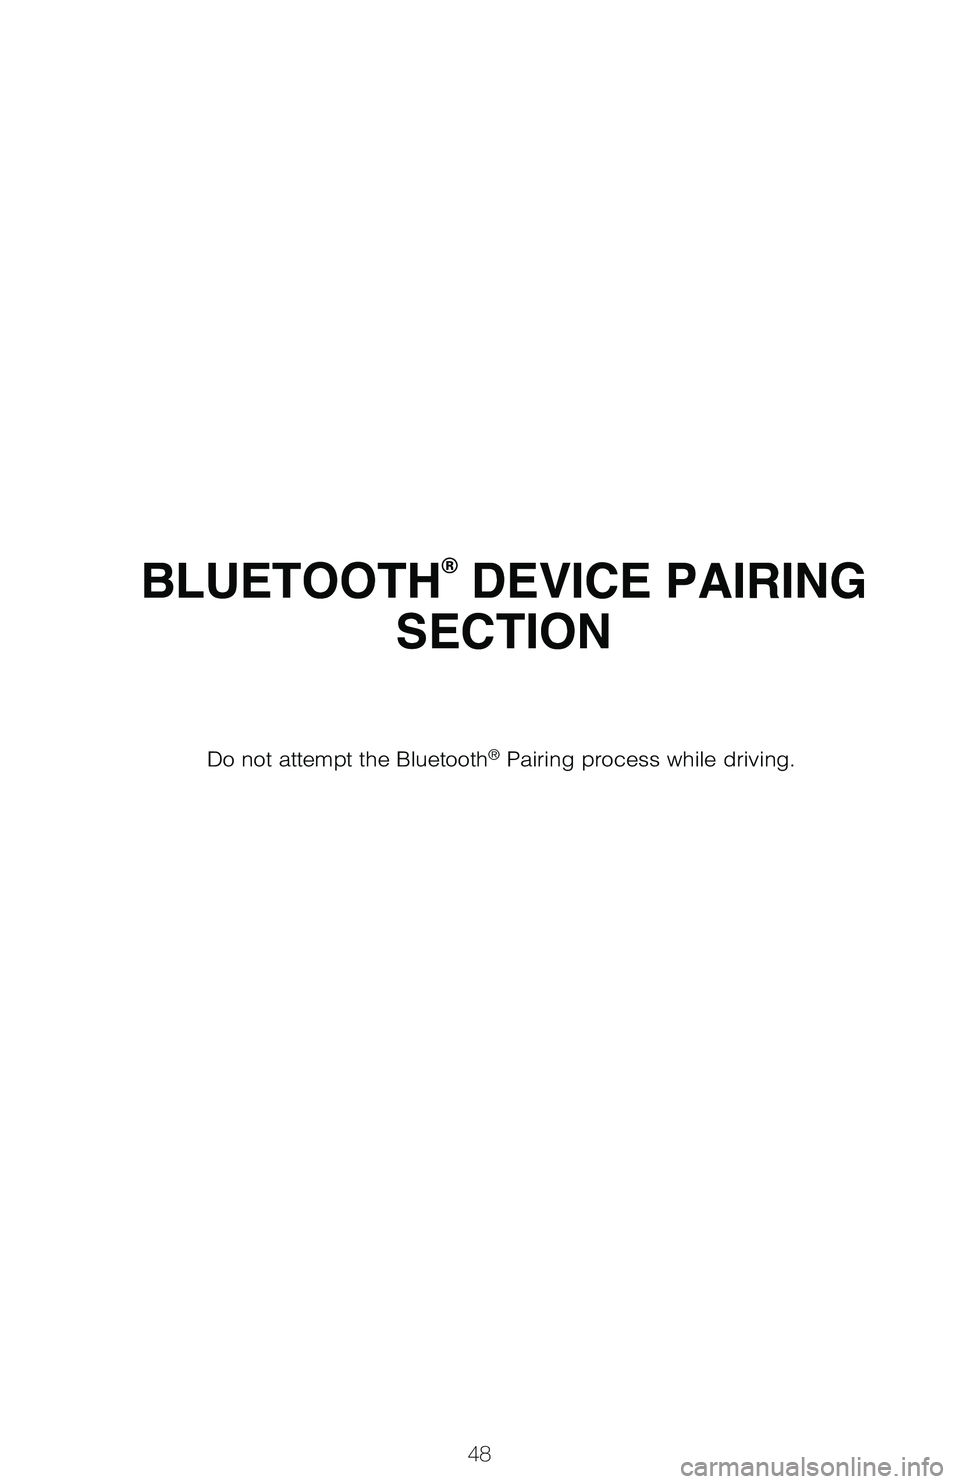 TOYOTA HIGHLANDER 2019  Owners Manual (in English) 48
BLUETOOTH® DEVICE PAIRING 
SECTION
Do not attempt the Bluetooth® Pairing process while driving.
114709_MY19_Highlander_QRG_V3_ML_0809_R1.indd   488/14/18   1:22 AM 